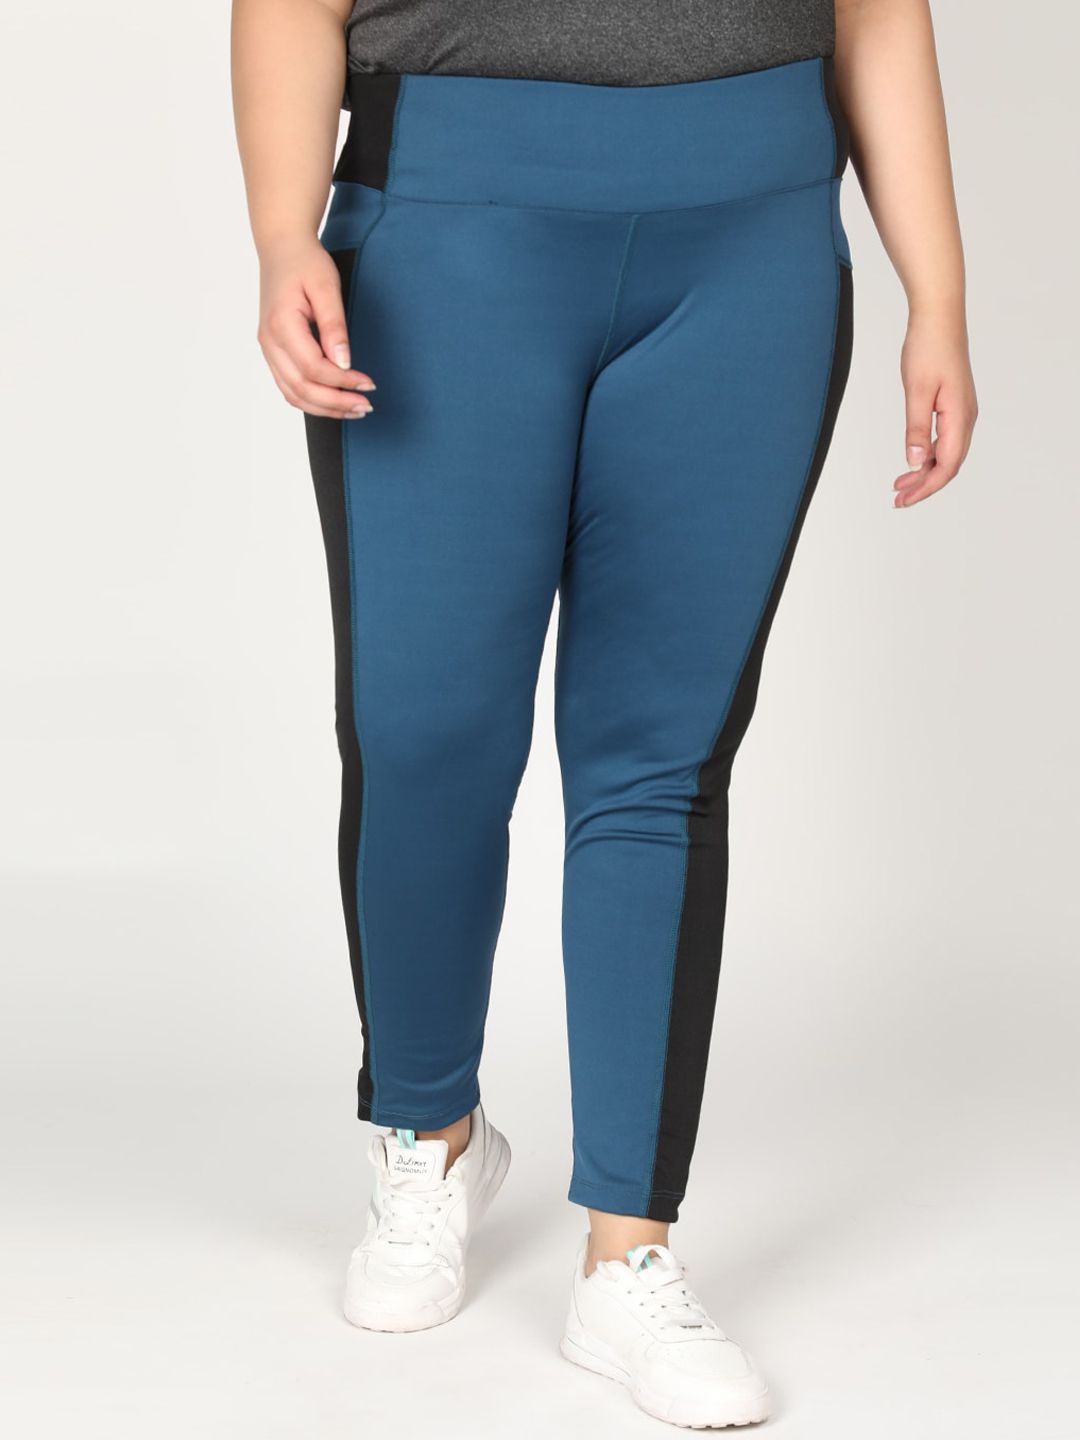 CHKOKKO Plus Women Blue Solid Skinny-Fit Training Tights Price in India